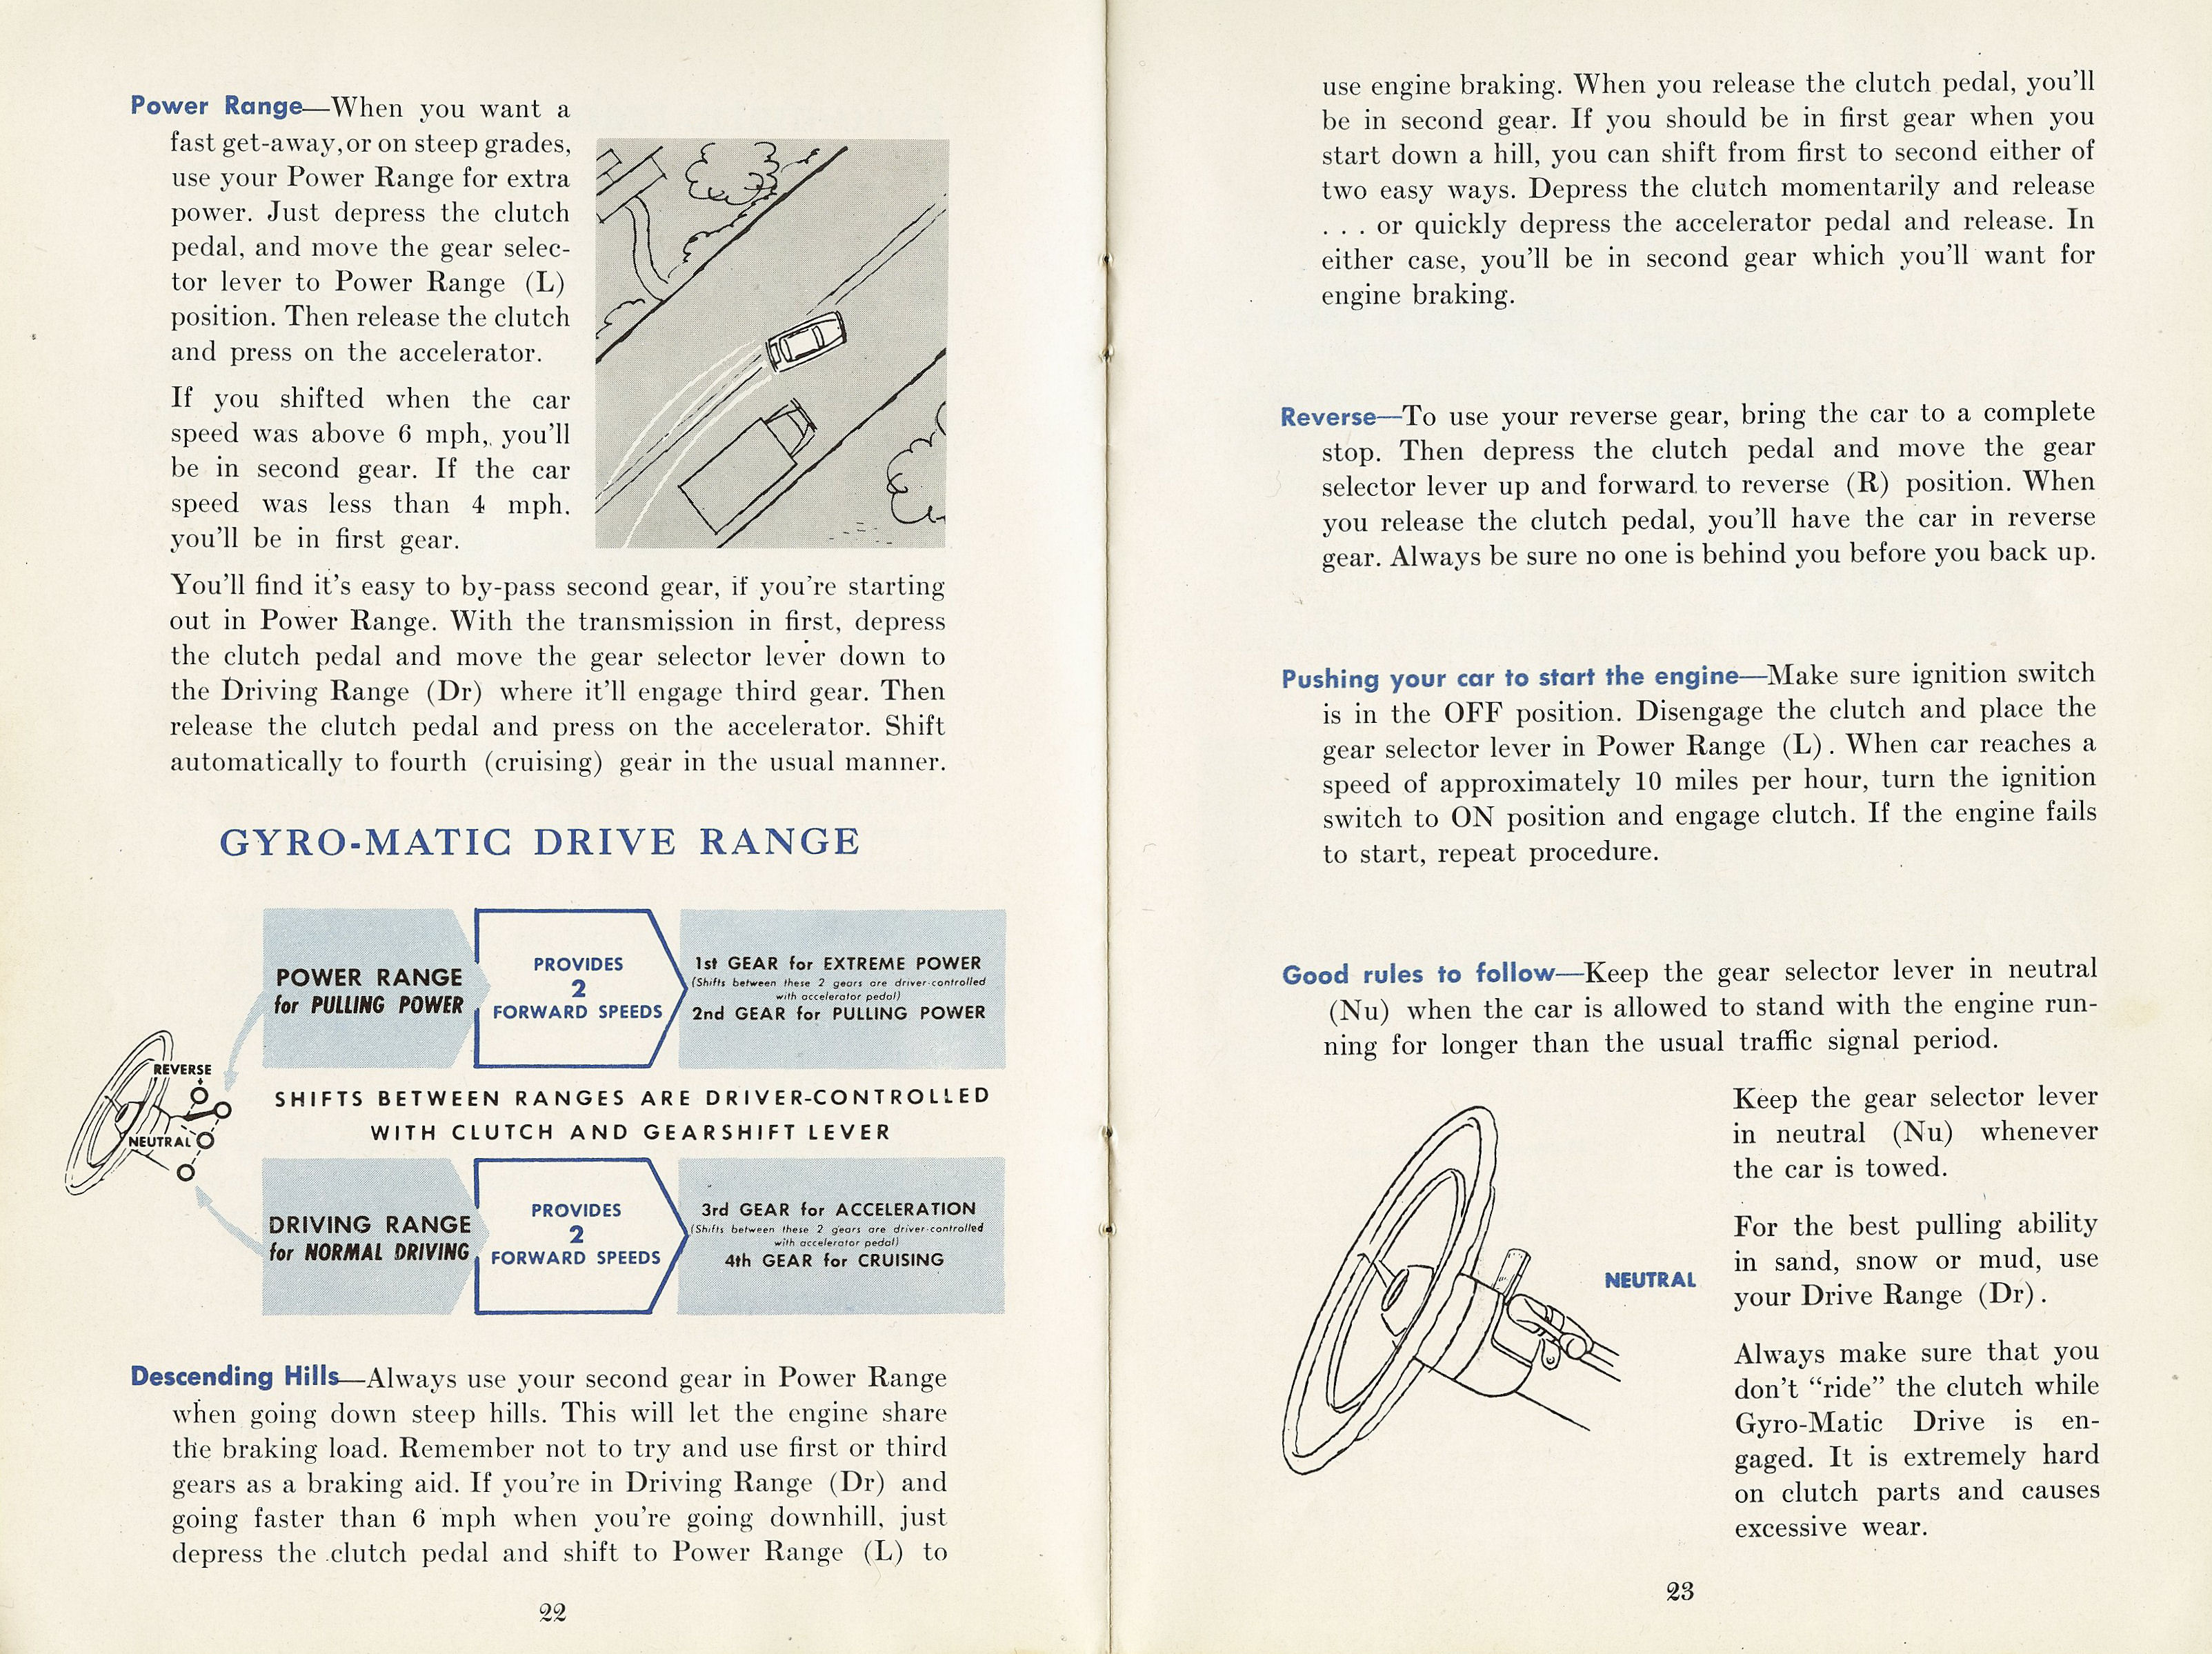 1954 Dodge Car Owners Manual Page 14